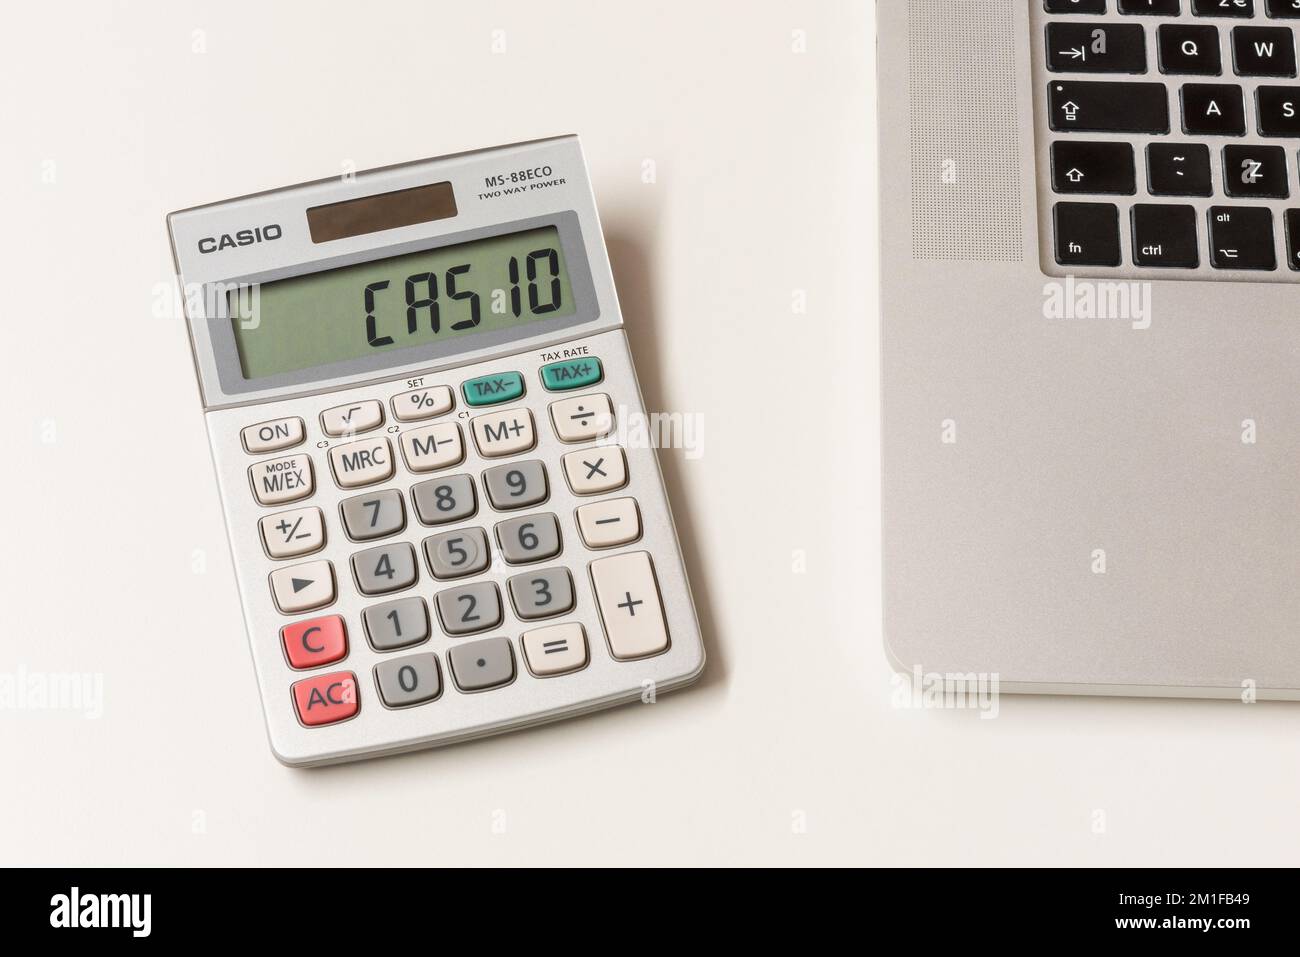 Casio Calculator on desktop, next to laptop computer. Casio is a Japanese multinational electronics manufacturing corporation, founded in 1946. Stock Photo